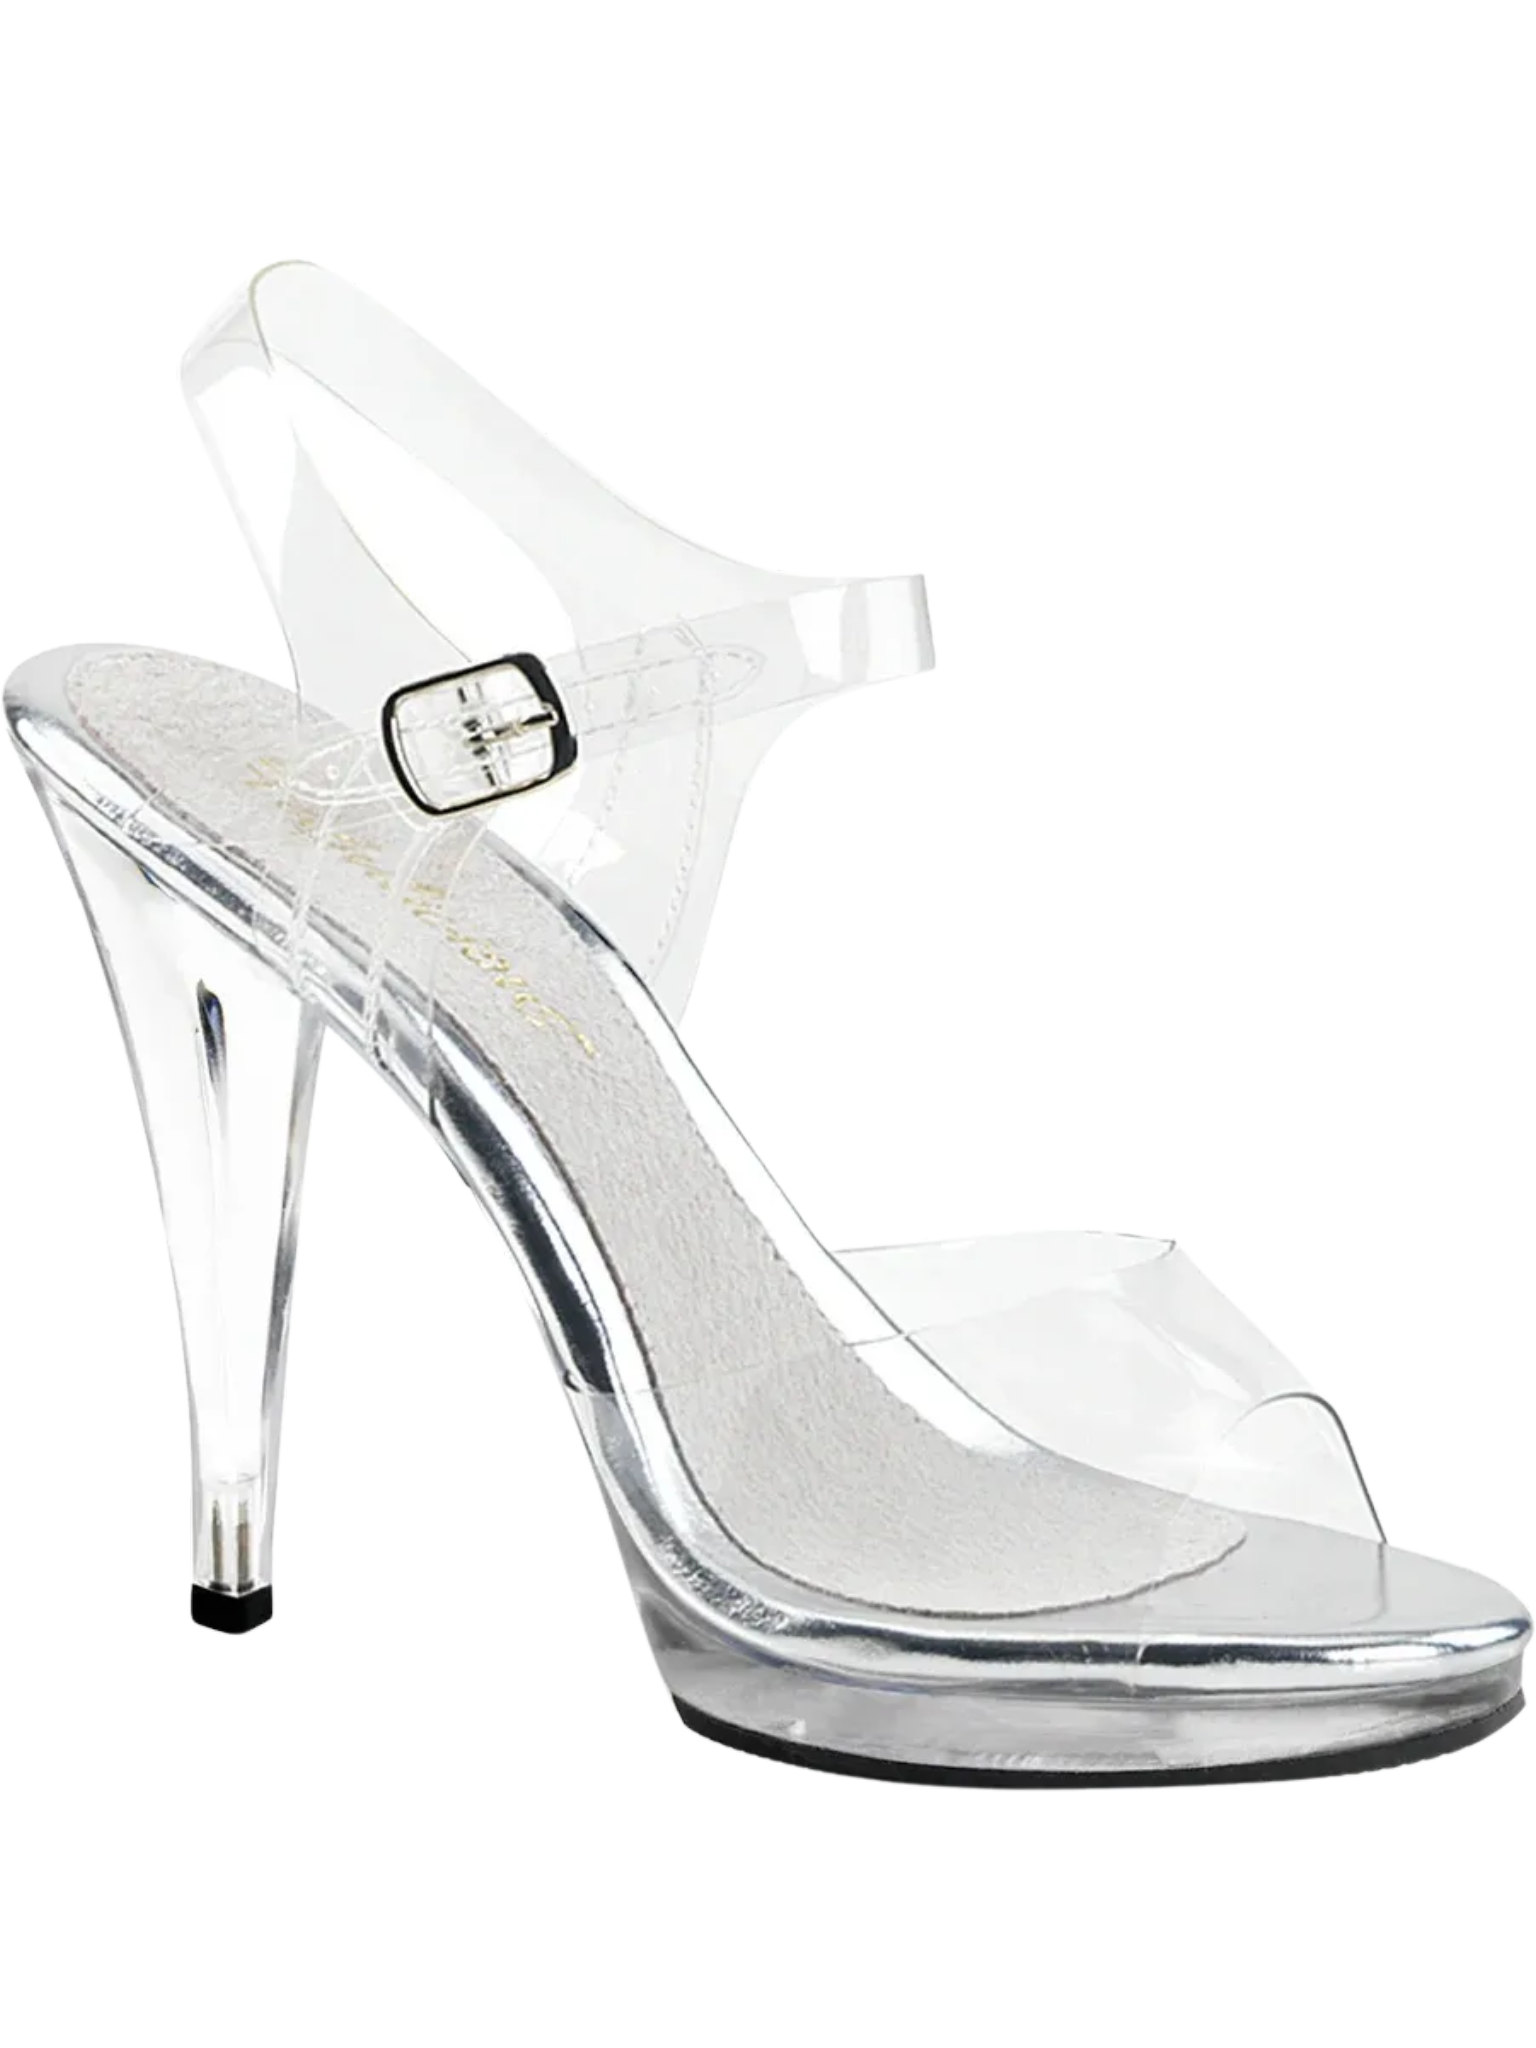 men's clear high heel shoe white background front side view XDress